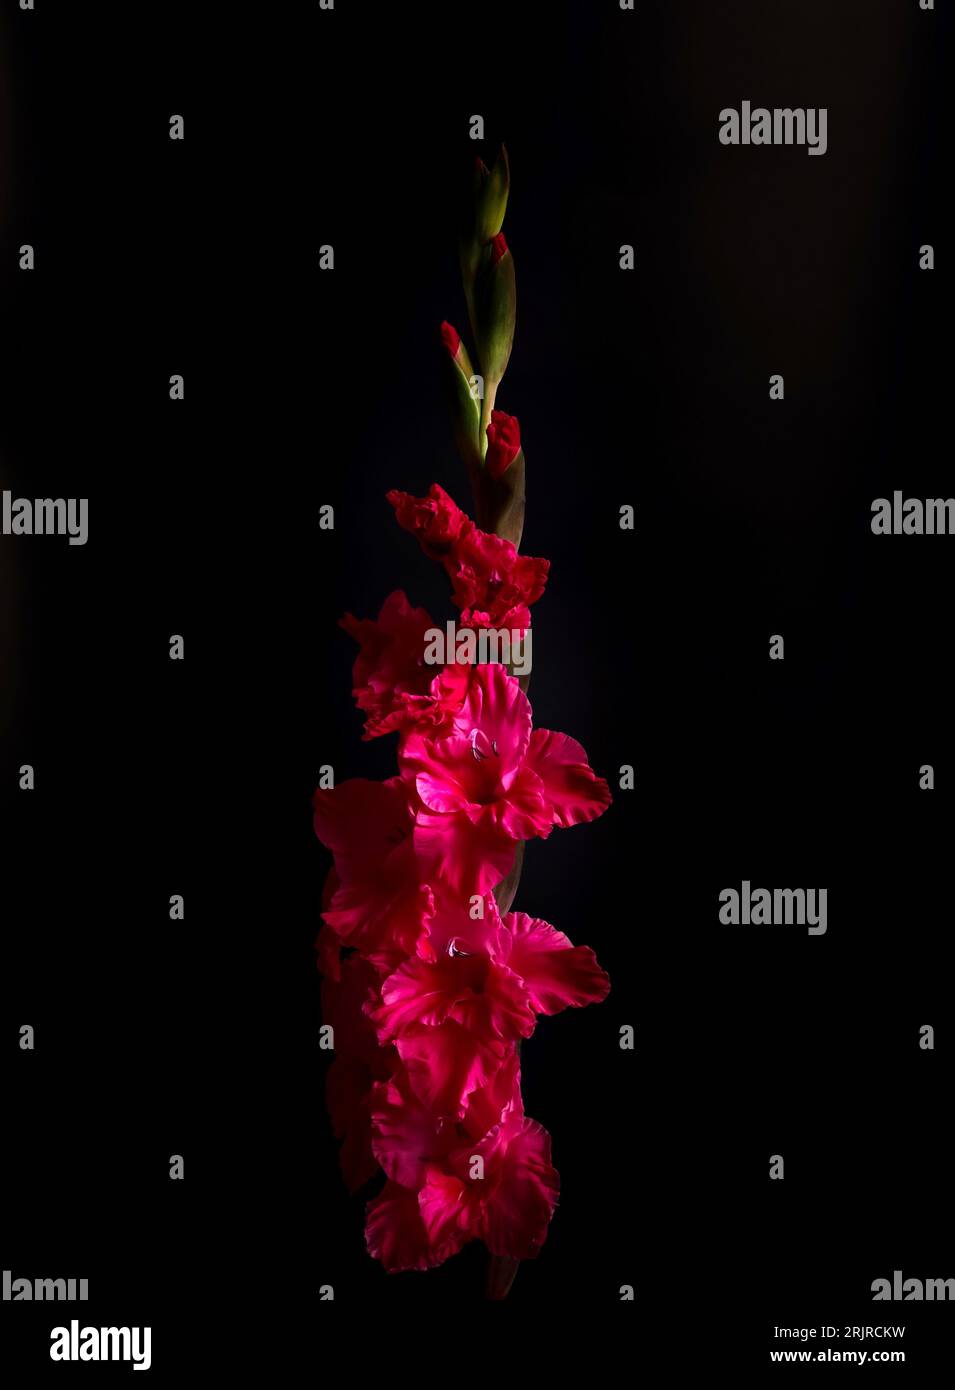 gladiolus flowers, multi-flowered inflorescence, colorful spiky decorative plant, close-up on a black background Stock Photo